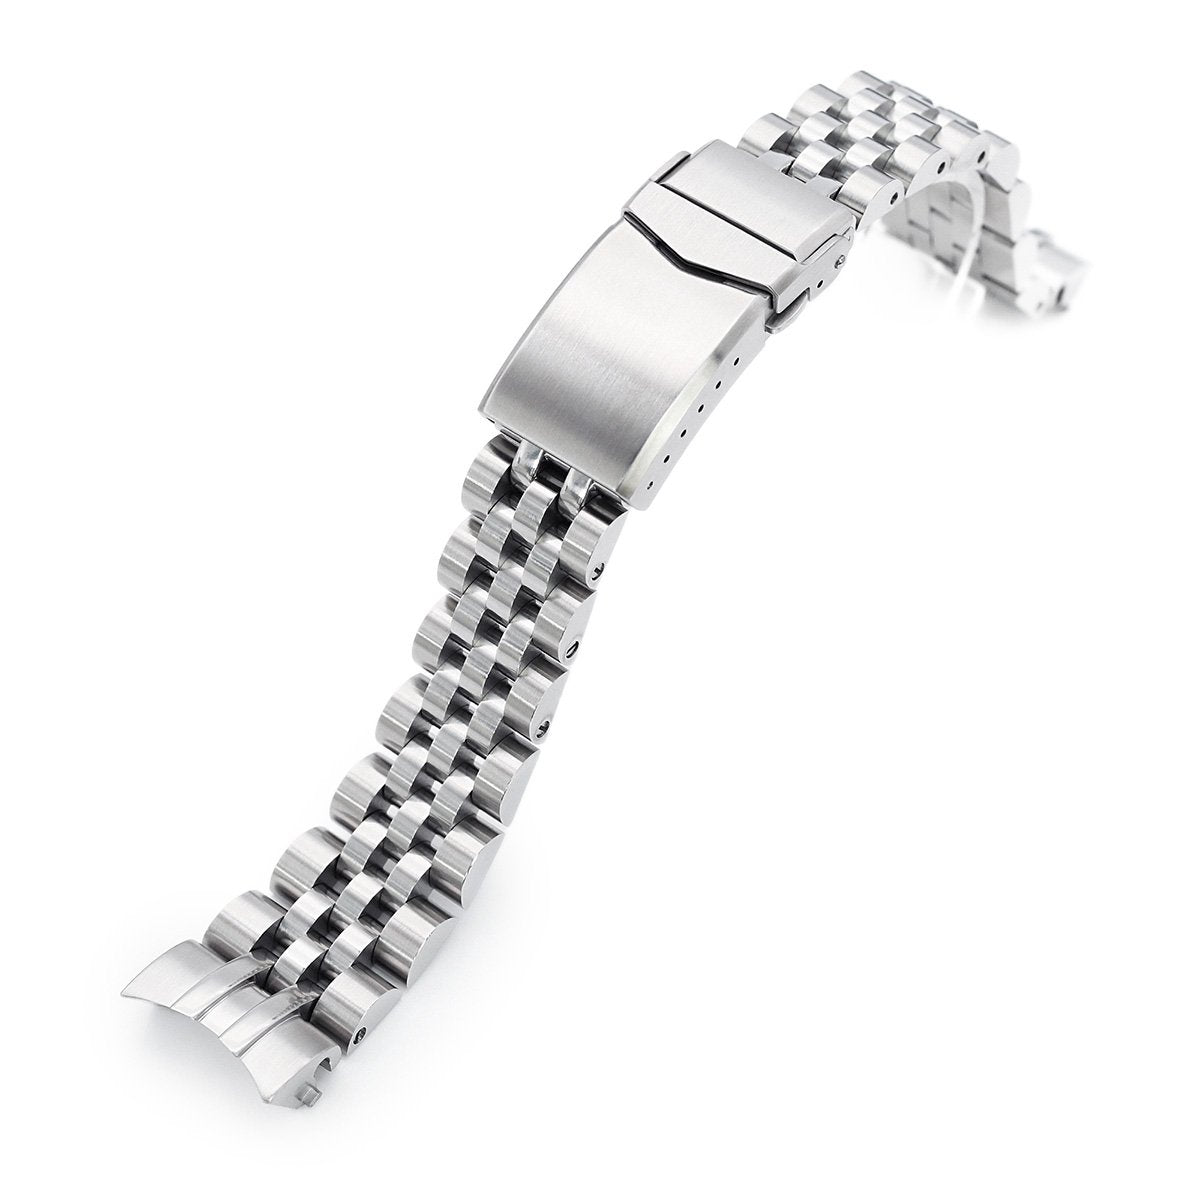 Beyond the Vintage Angus Louis Watch Bracelet for TUD Tiger 79280 in Brushed V-Clasp Strapcode Watch Bands